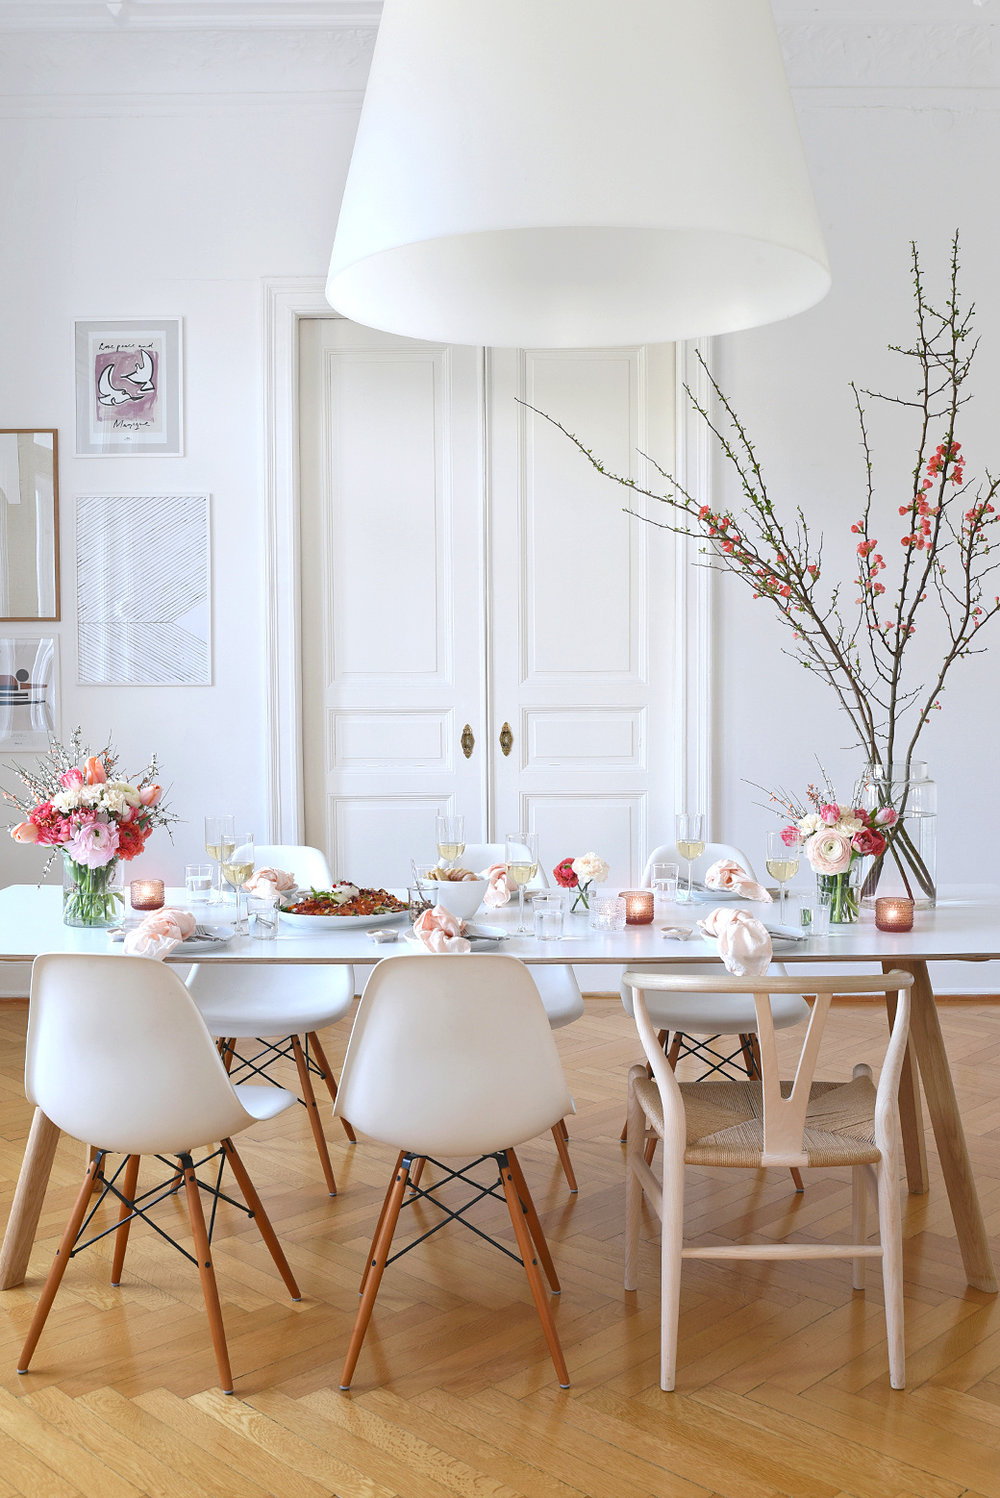 March+Dinner+Party+Inspiration+With+Pale+Salmon+%2B+Fresh+Flowers